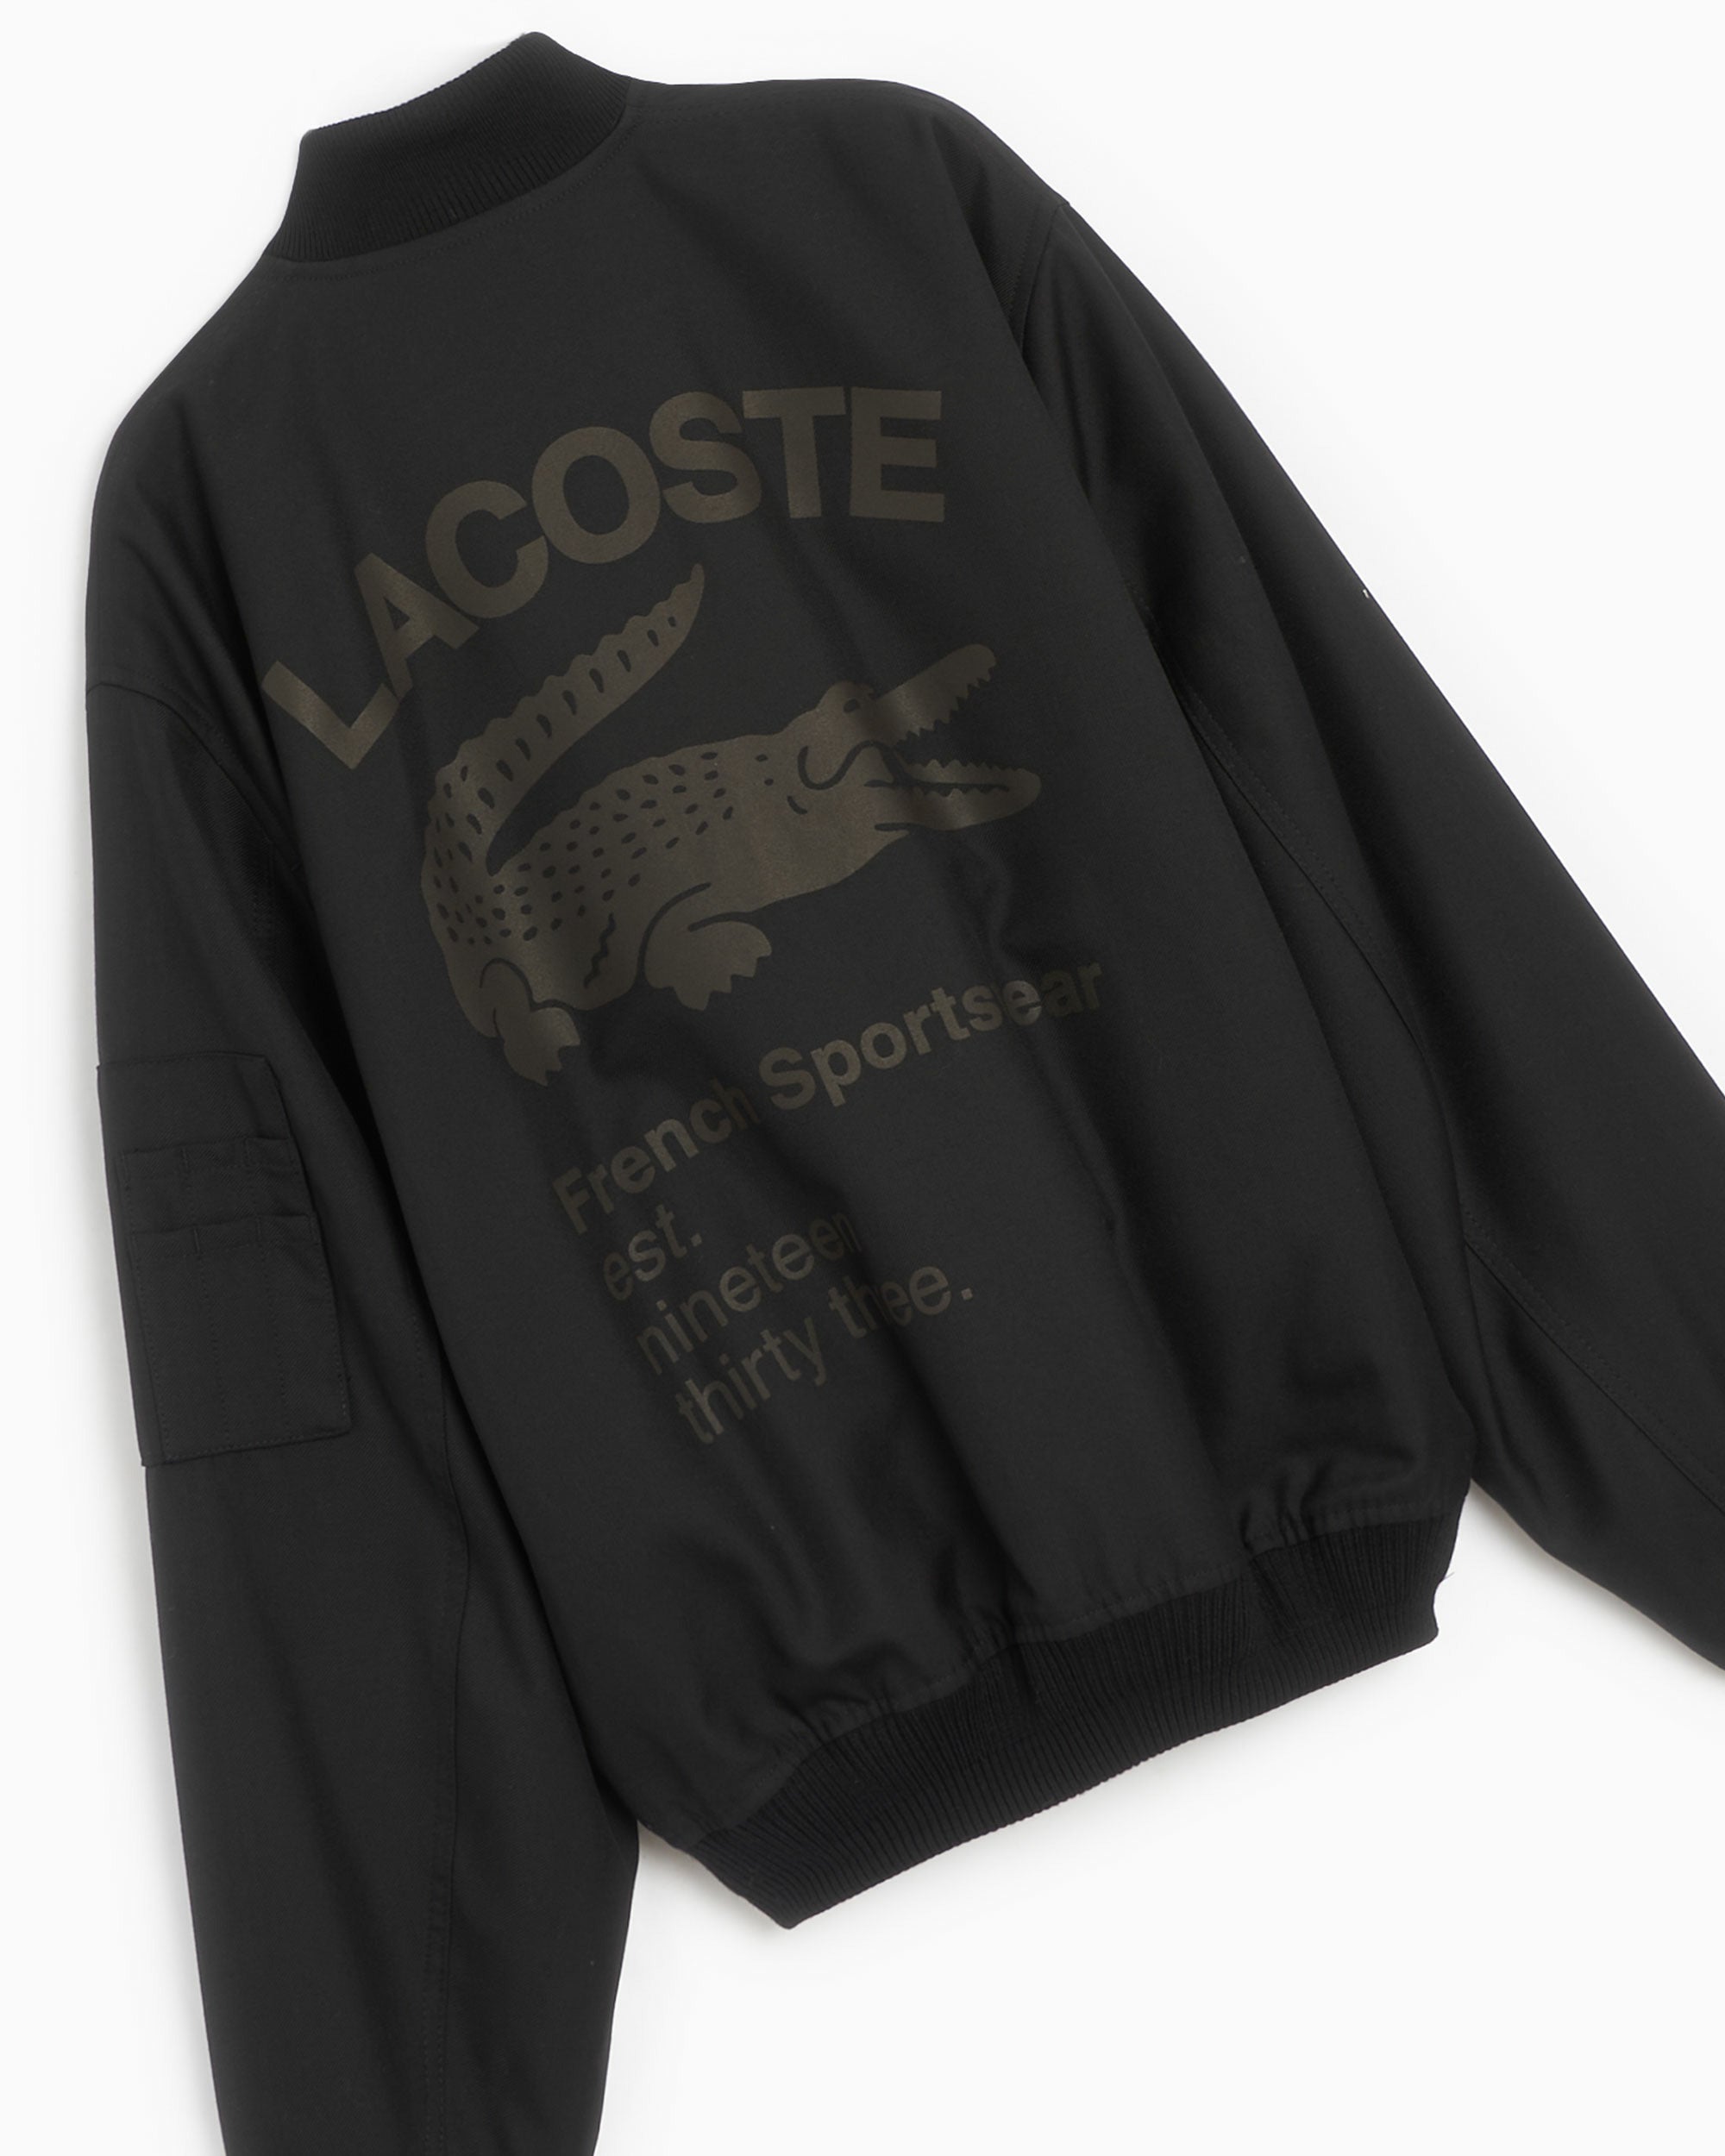 Lacoste Branded Graphic Icons Bomber Jacket